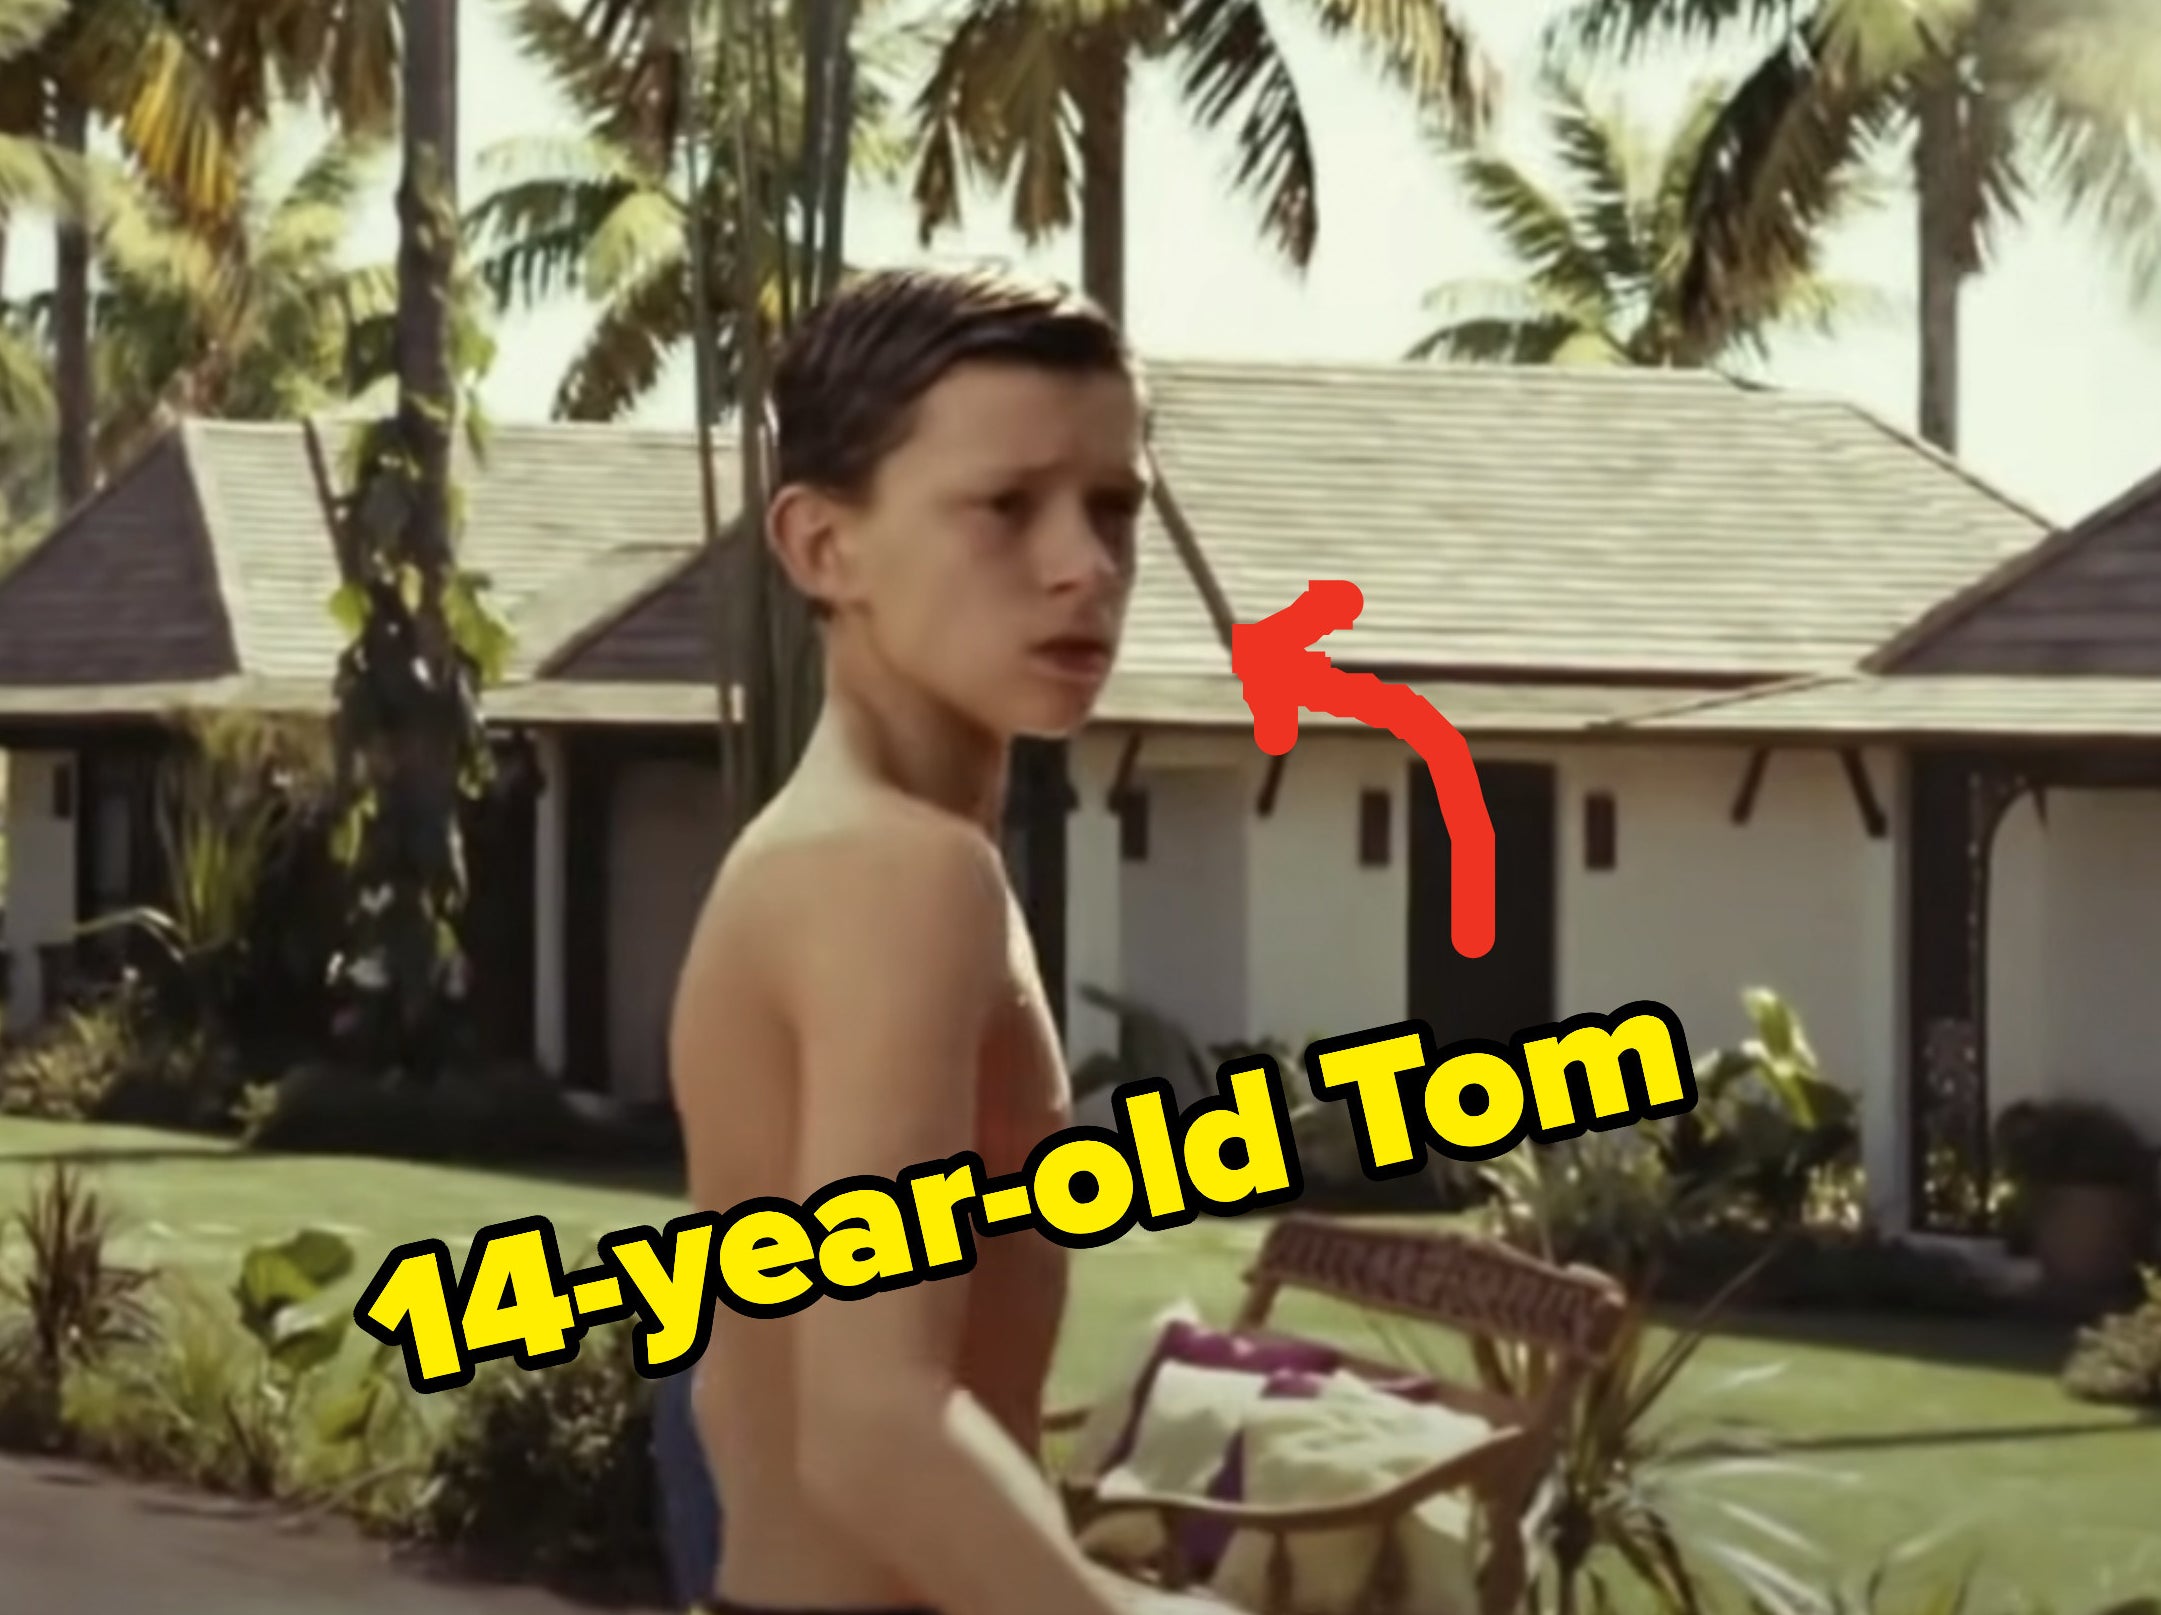 arrow pointing to a shirtless 14 year old Tom